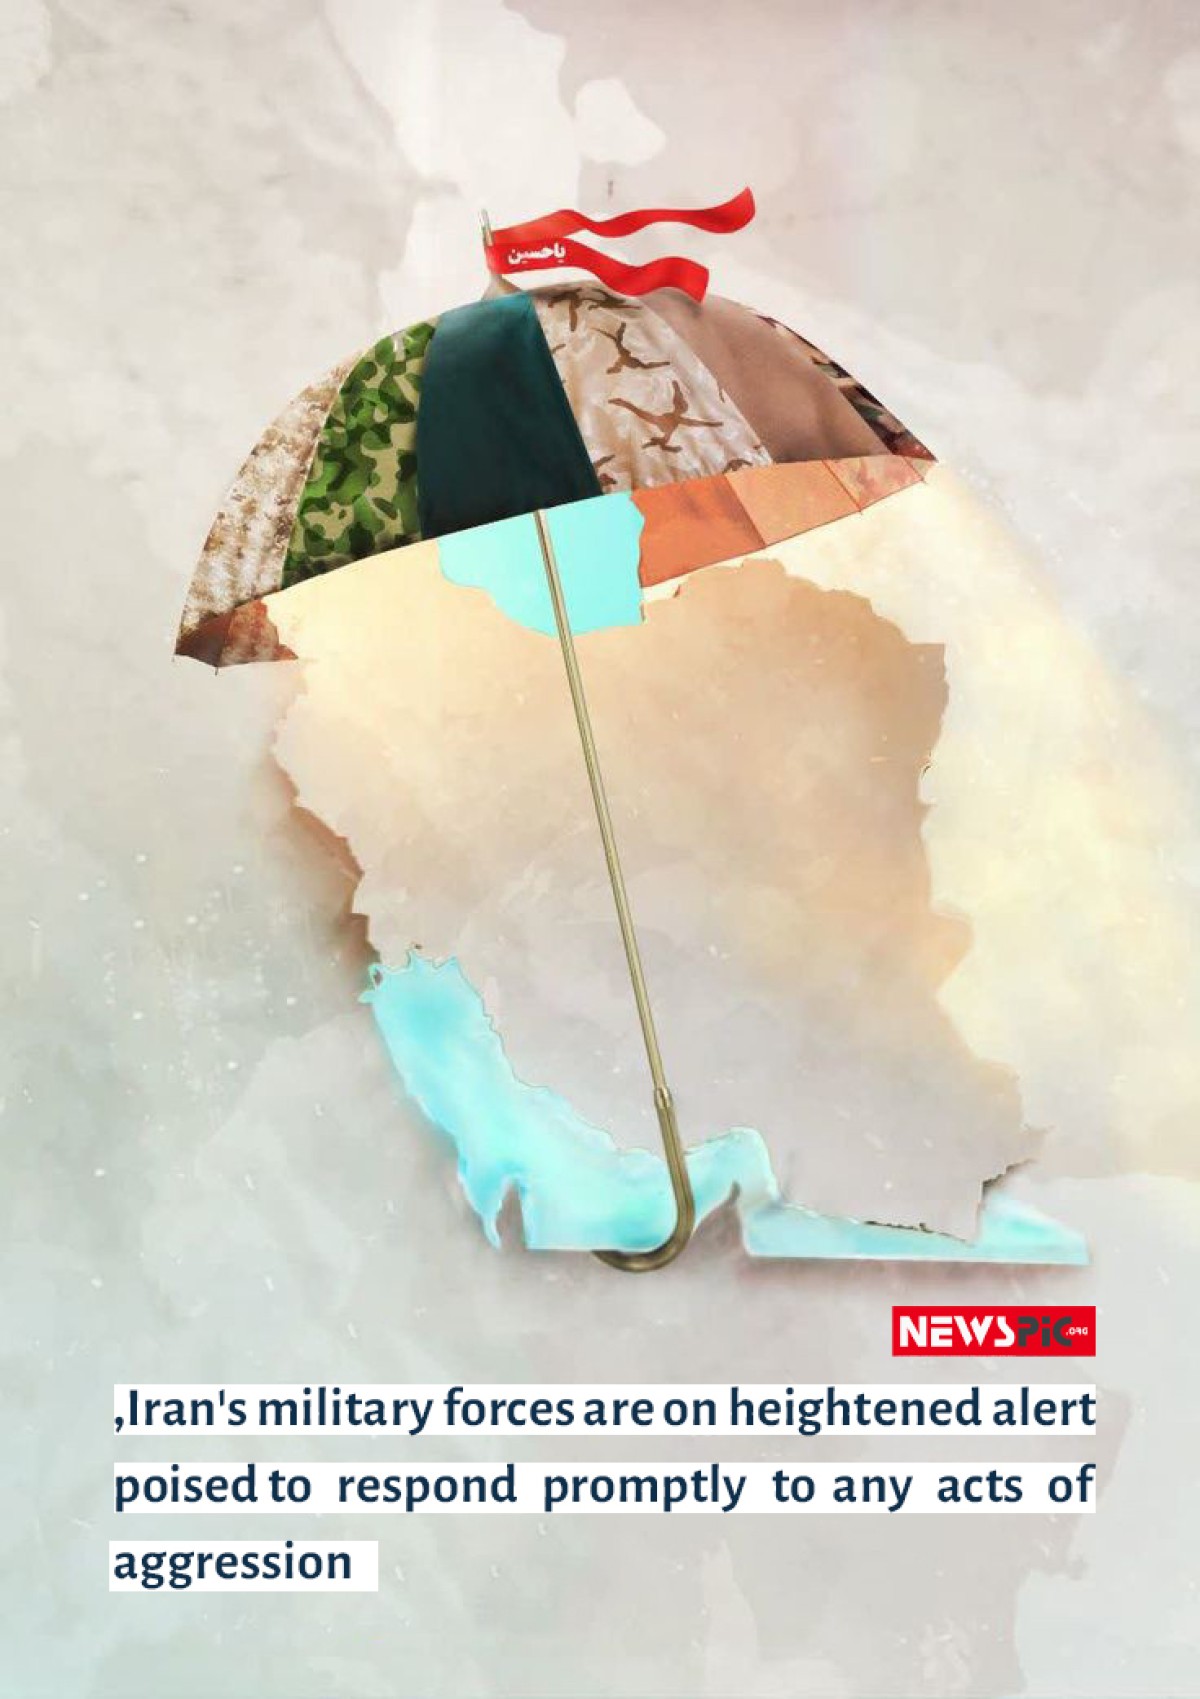 Iran's military forces are on heightened alert poised to respond promptly to any acts of aggression